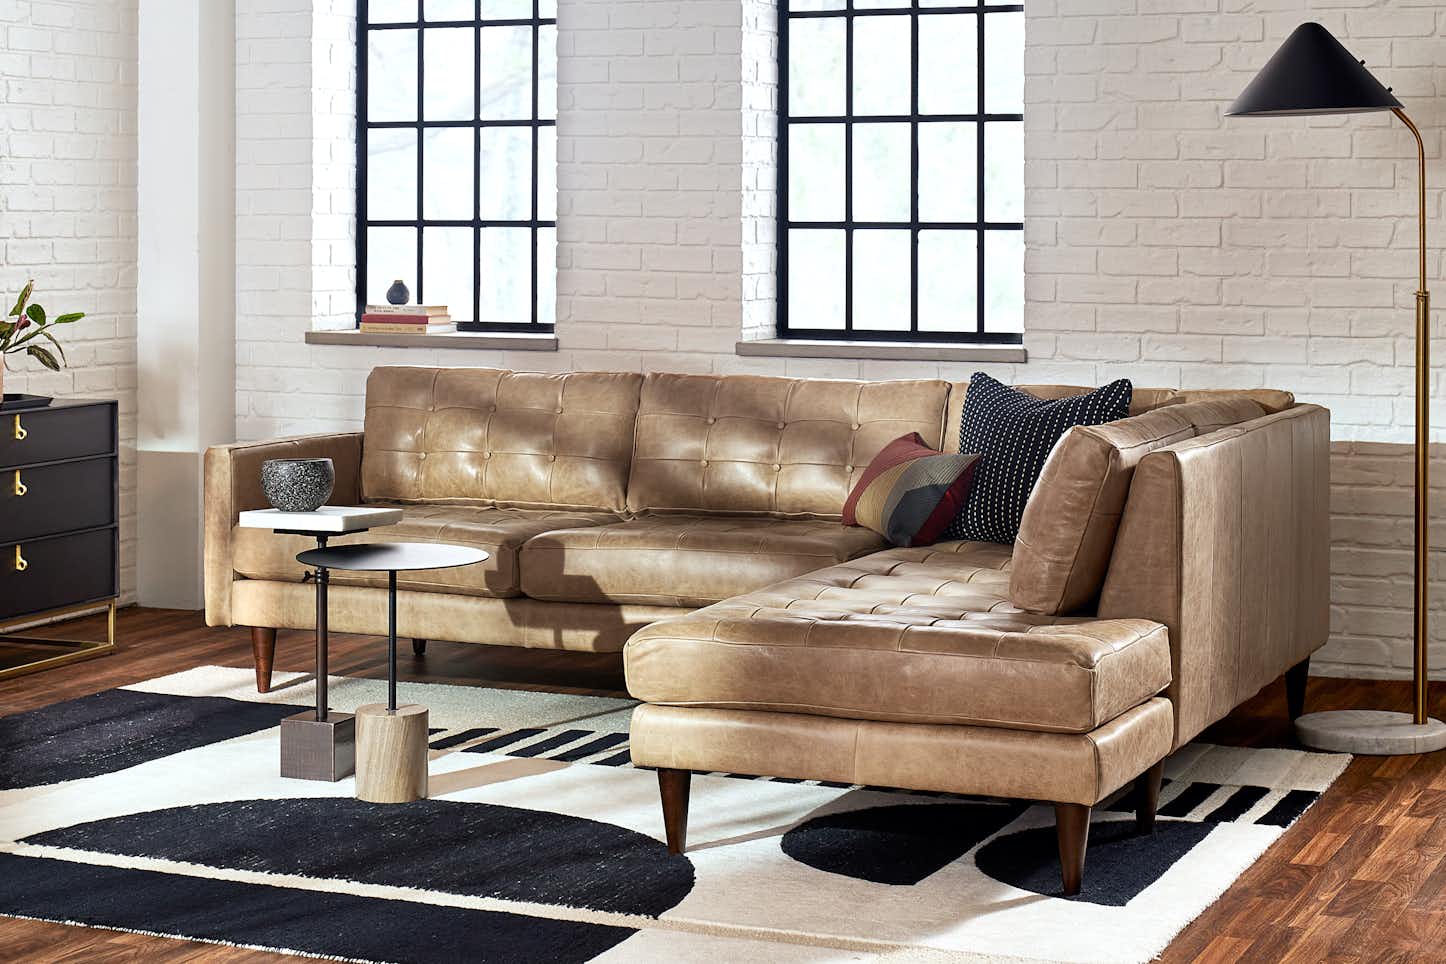 Eliot Leather Sectional with Bumper (2 piece) | Joybird